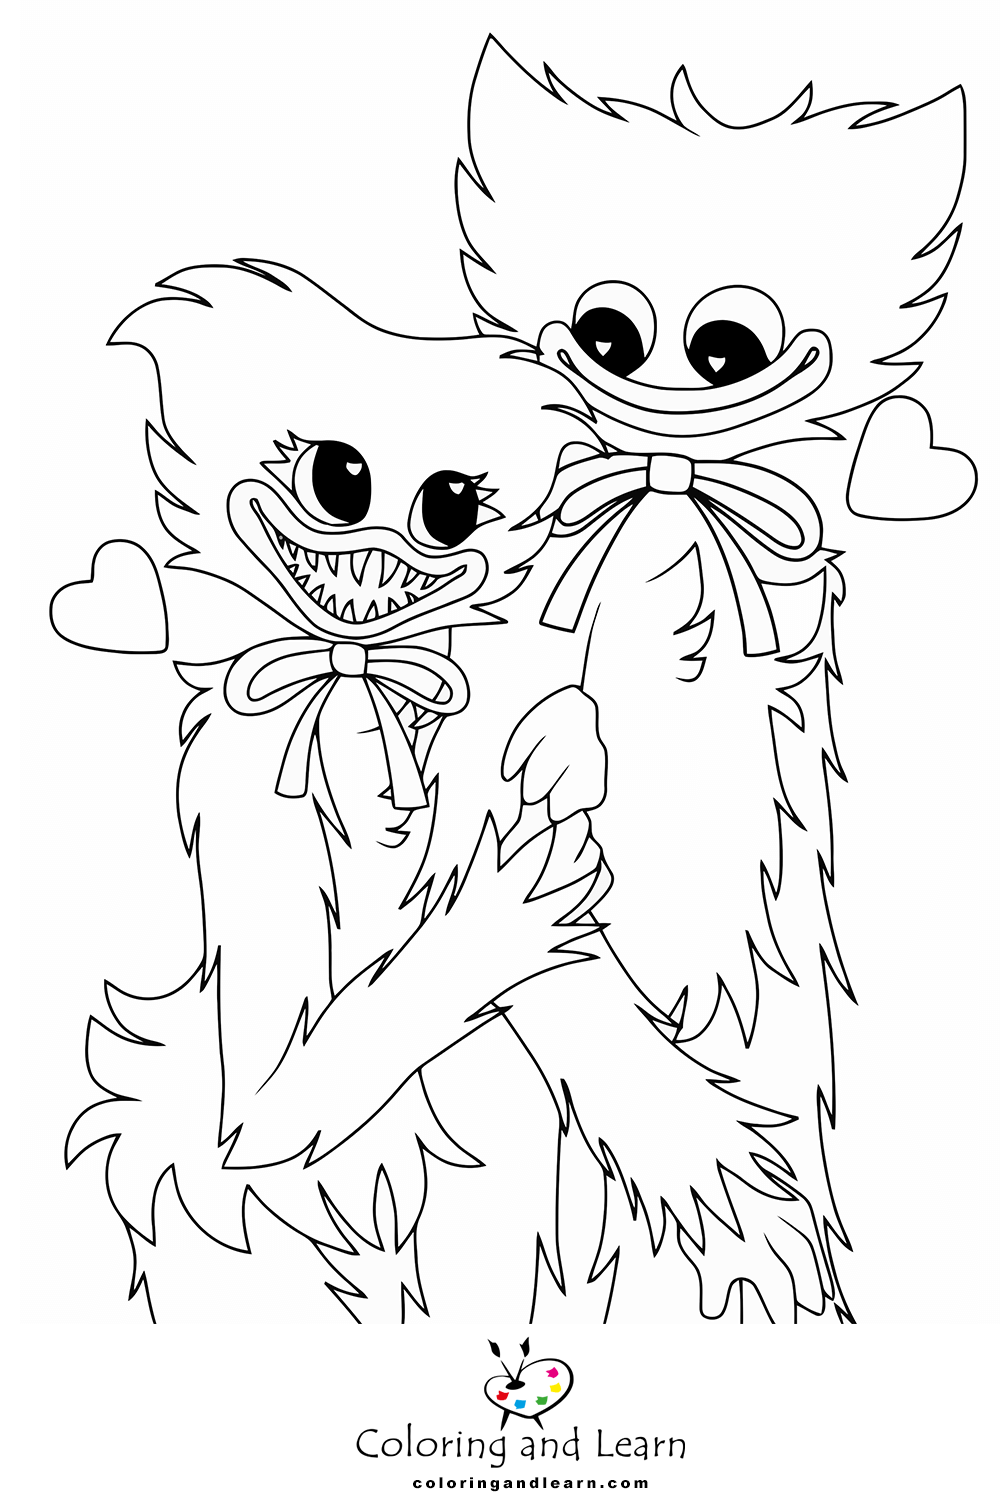 Huggy Wuggy Coloring Pages - Coloring Pages For Kids And Adults in 2023